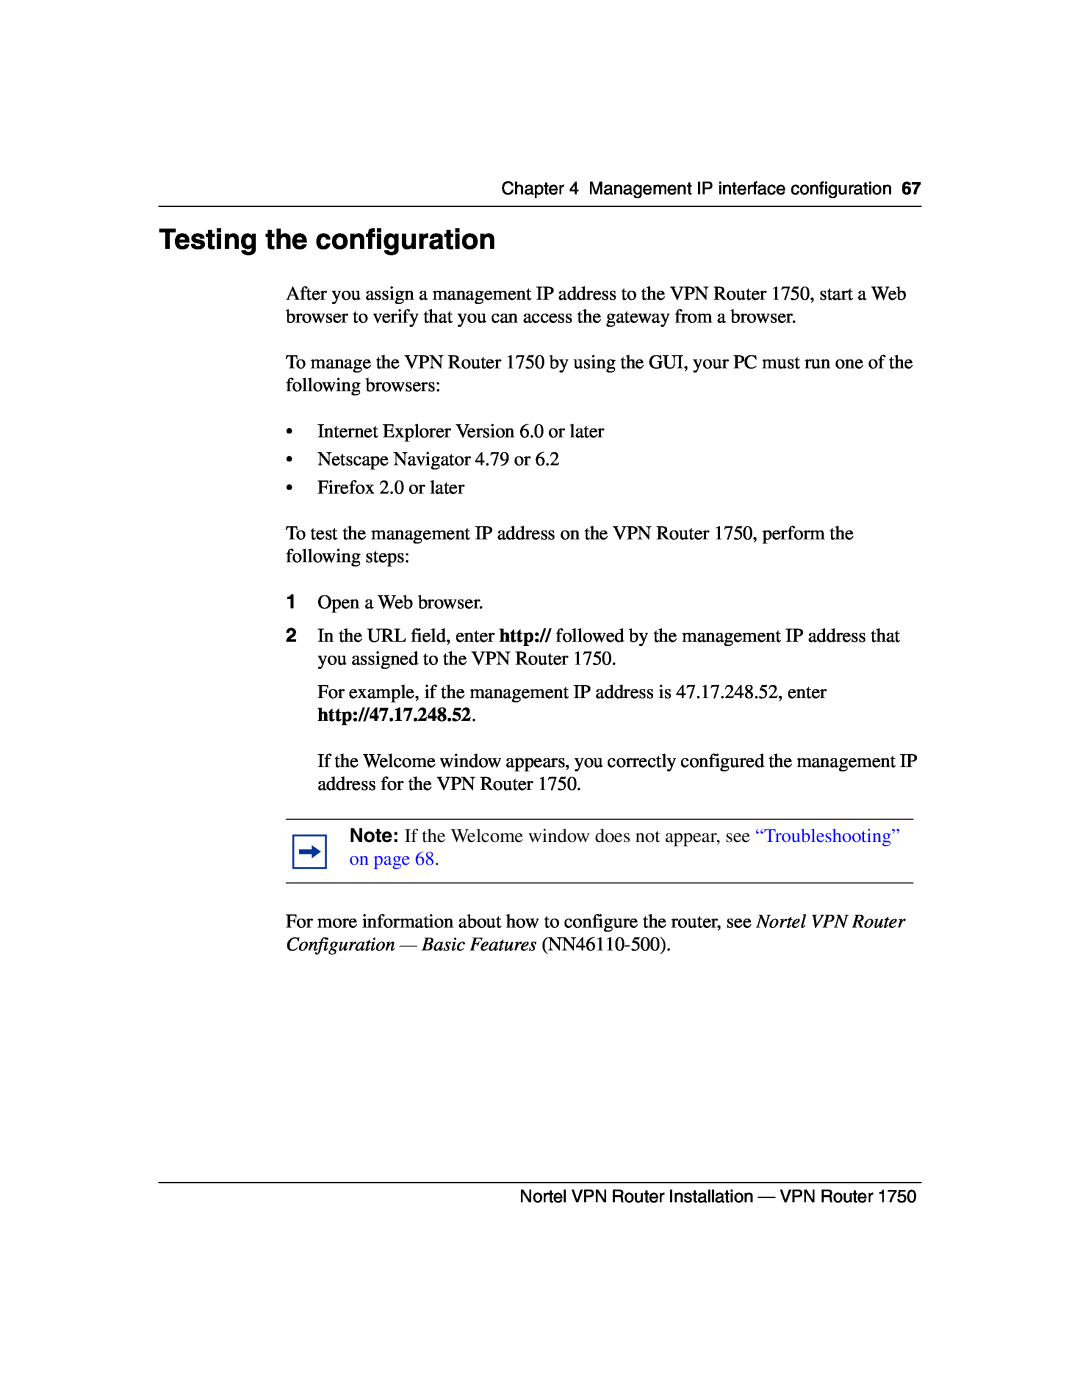 Nortel Networks 1750 manual Testing the configuration 